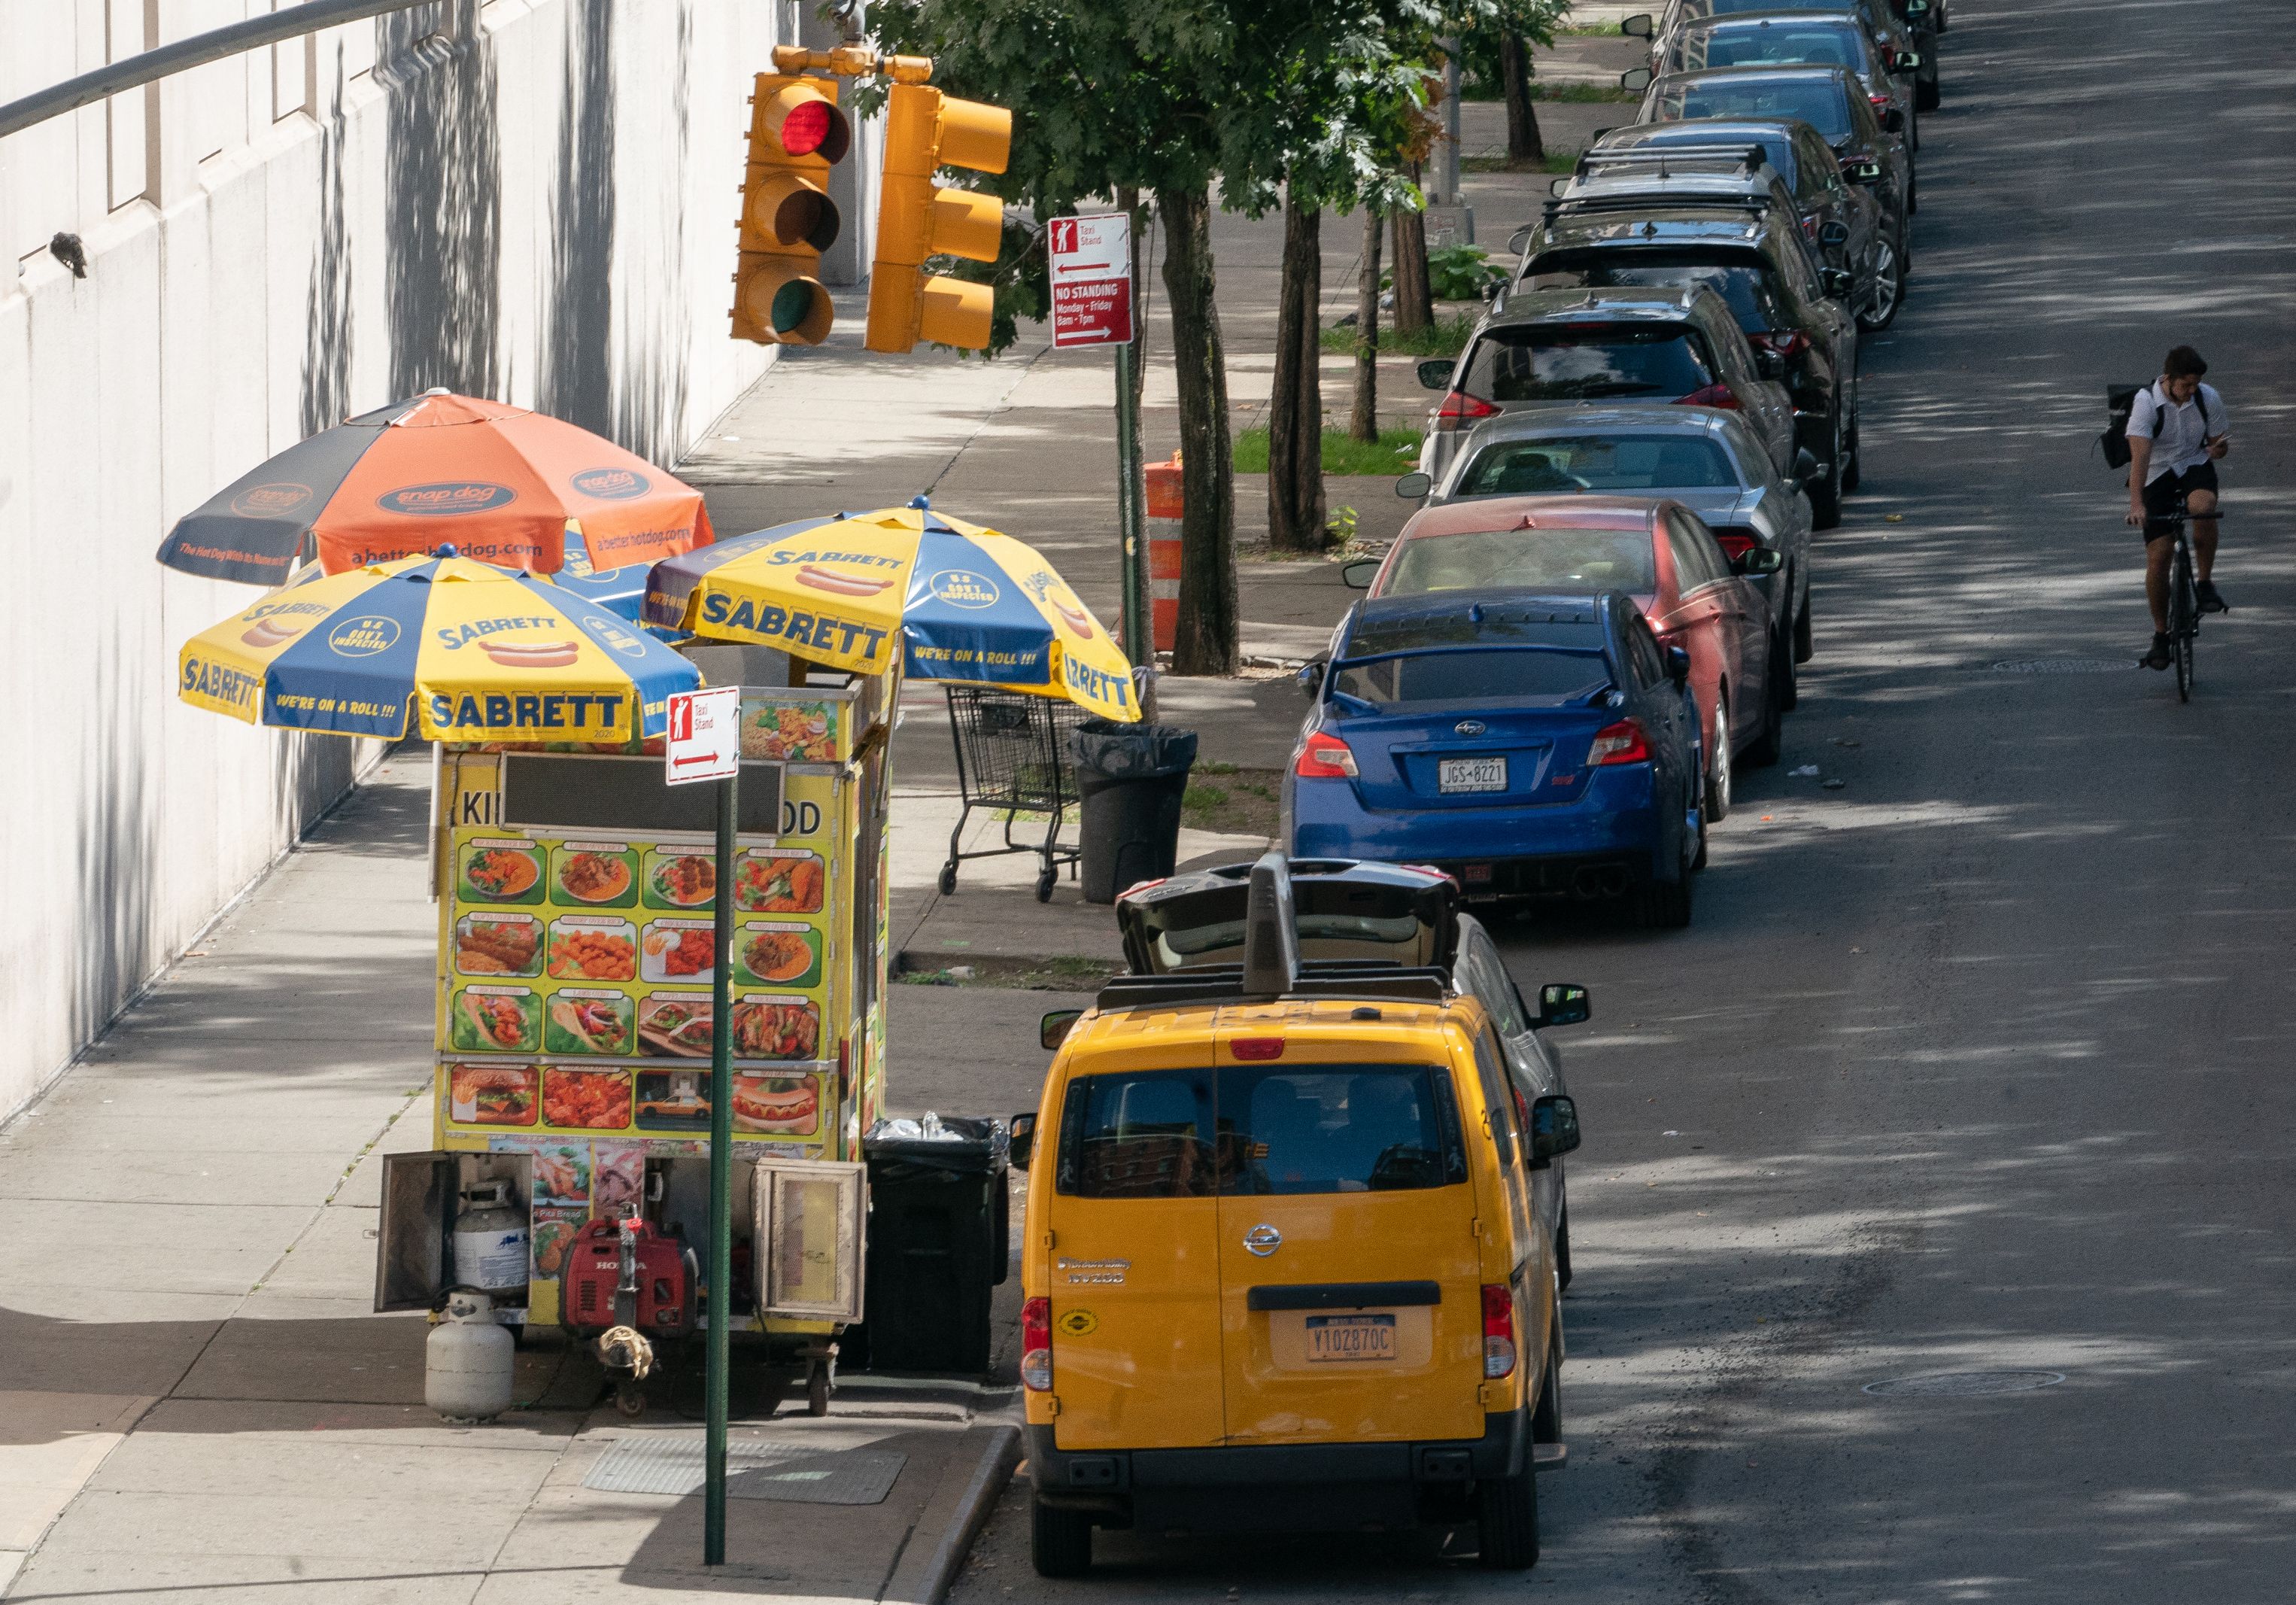 A brightly colored food cart with three umbrellas shading the cart from sun is parked on the sidewalk.